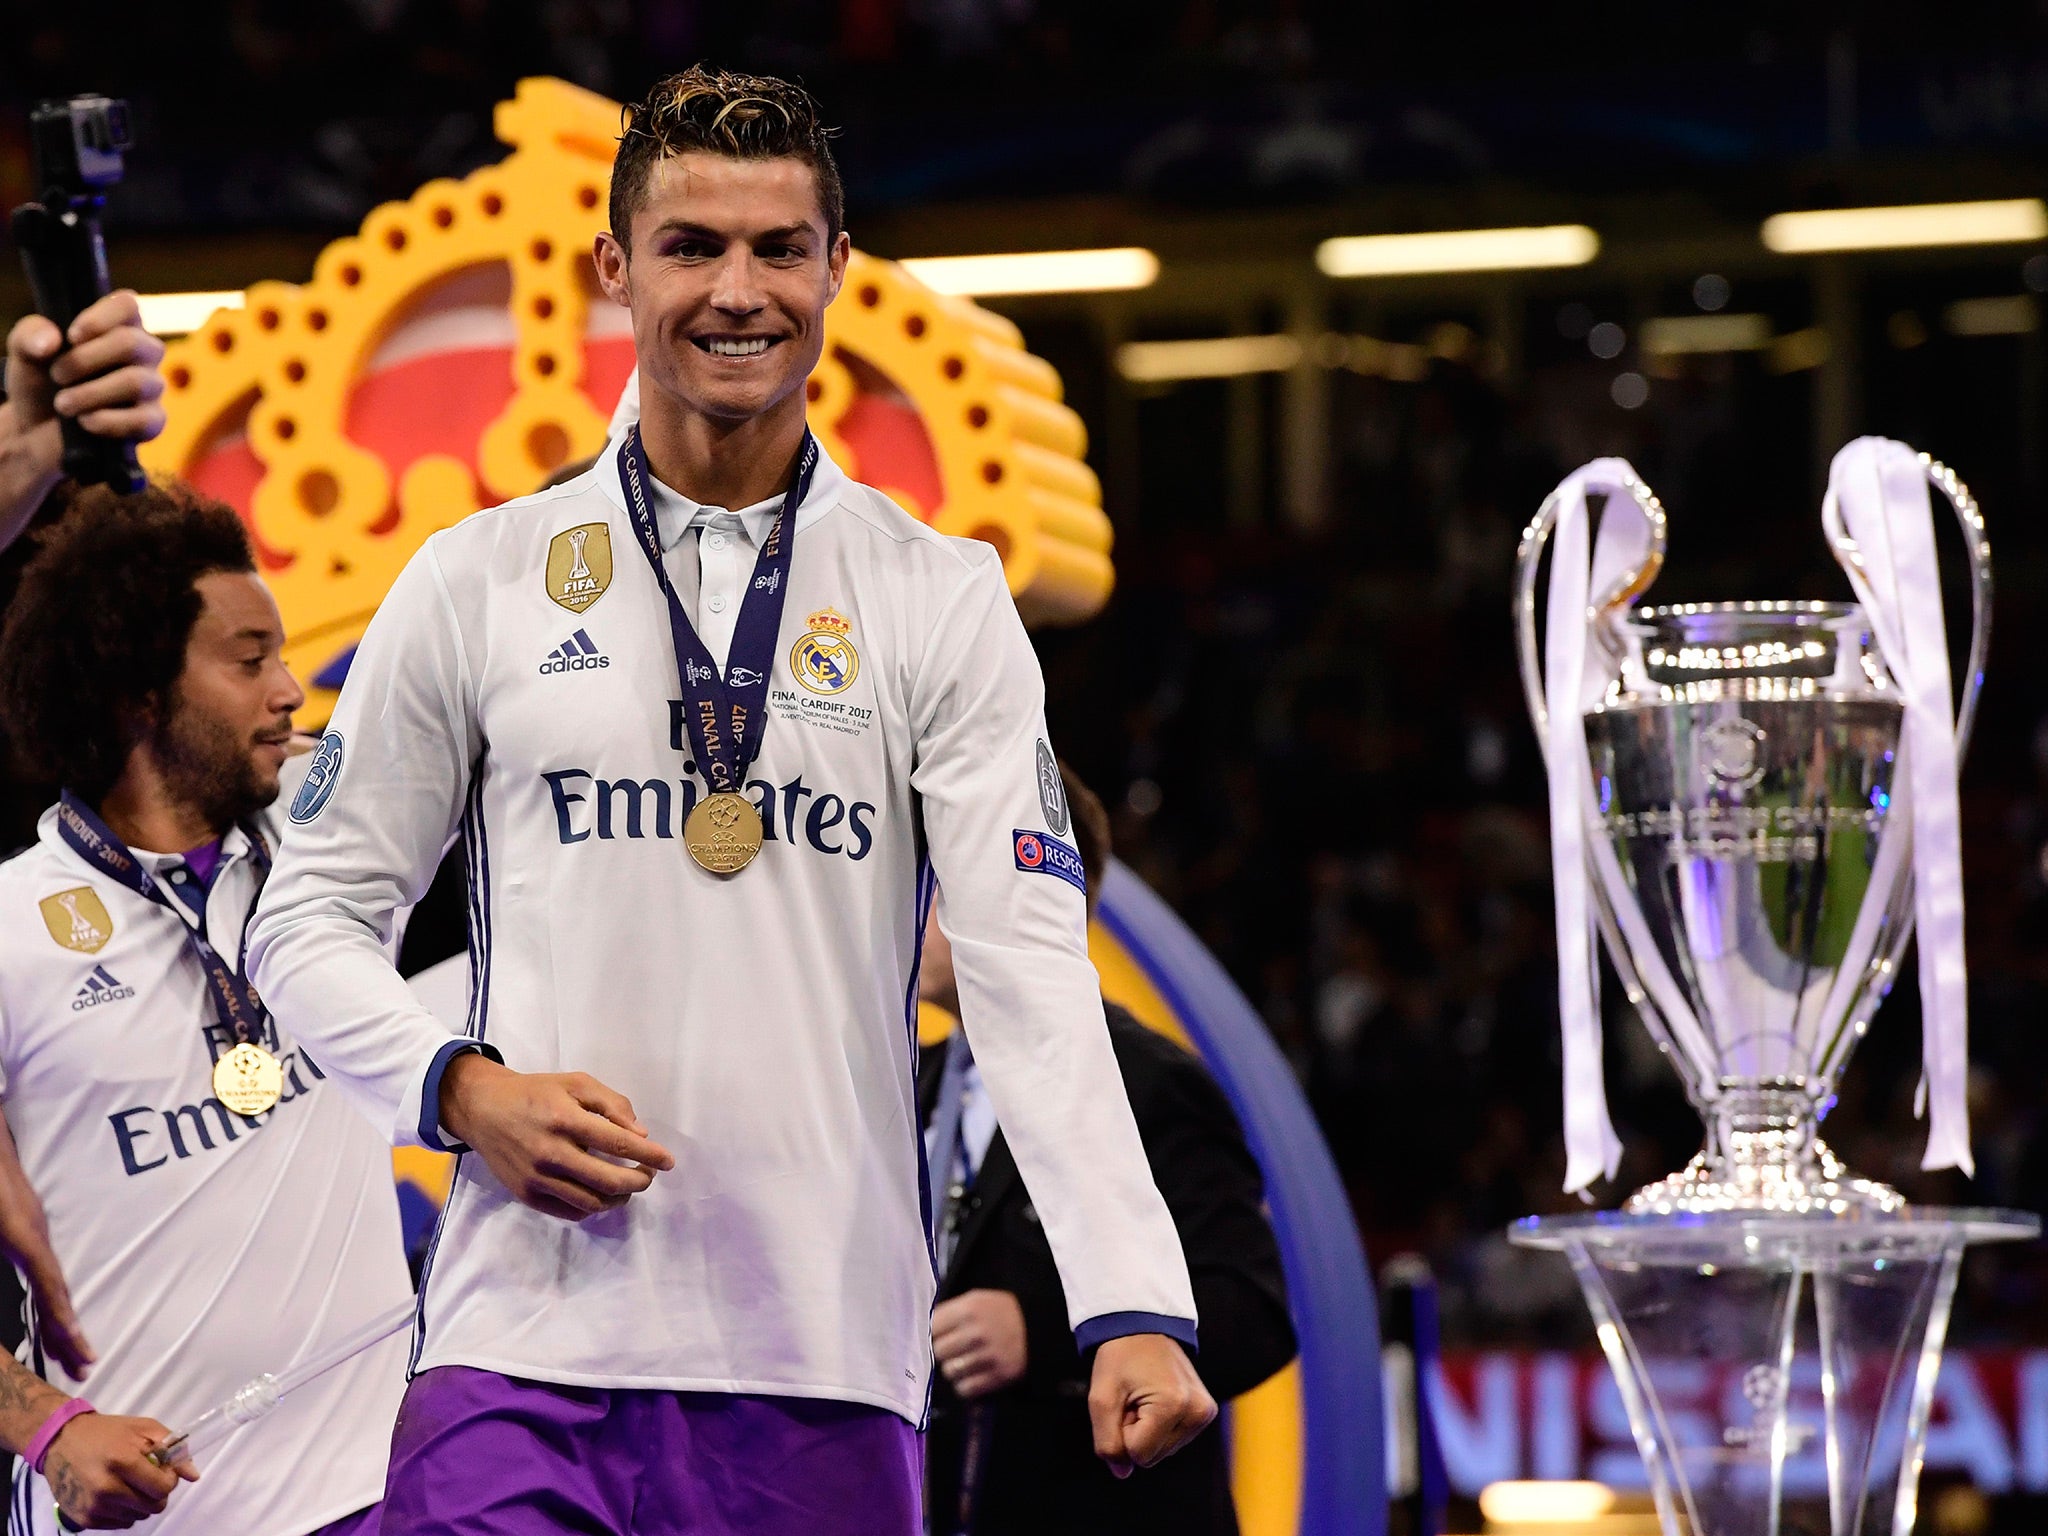 Cristiano Ronaldo inspired Real Madrid to victory in the Champions League final in Cardiff